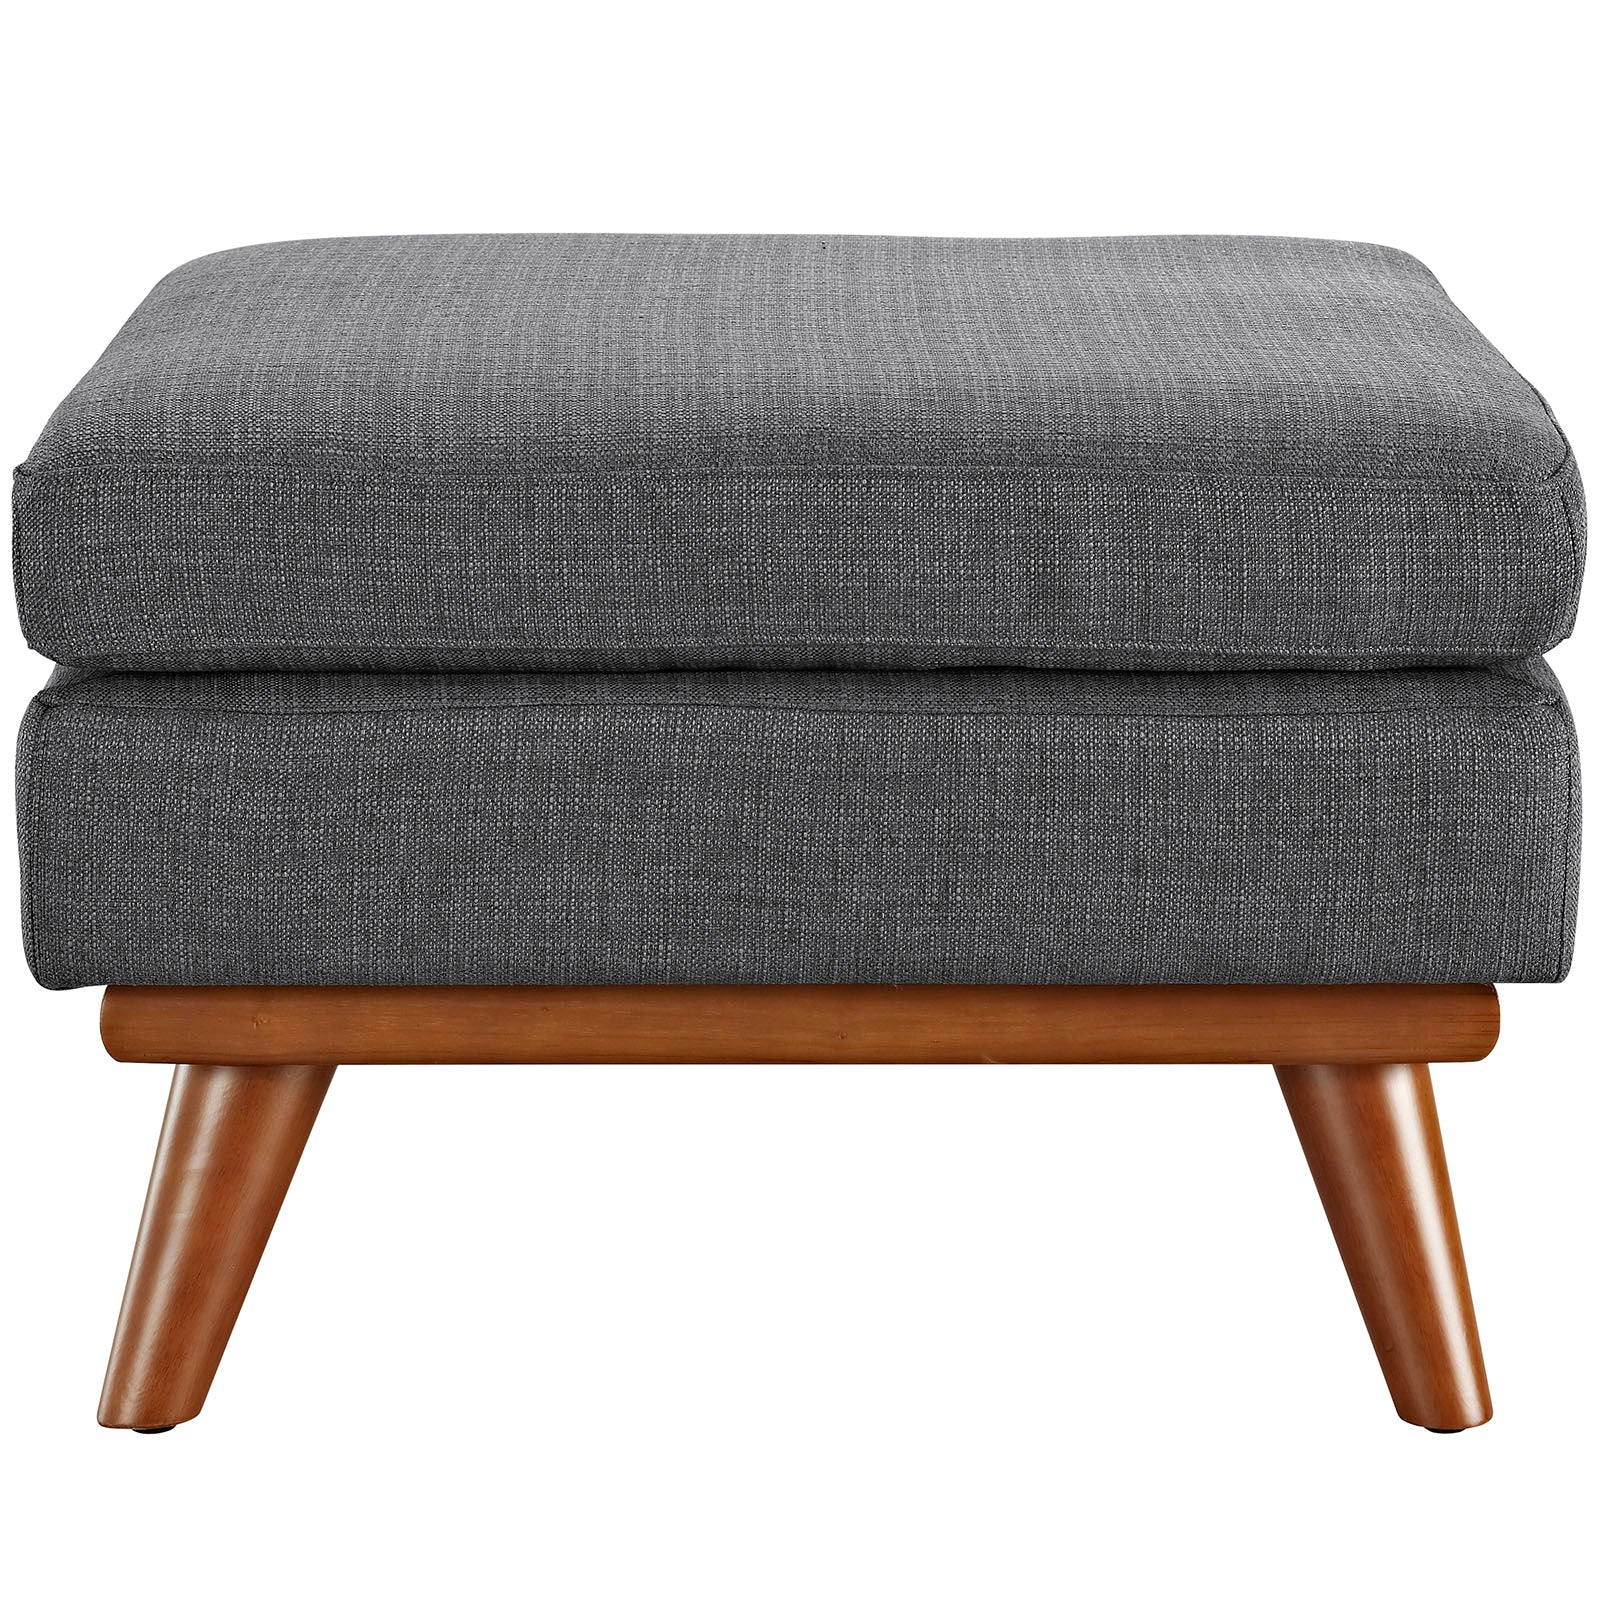 Modway Ottomans & Stools - Engage Upholstered Fabric Ottoman Gray